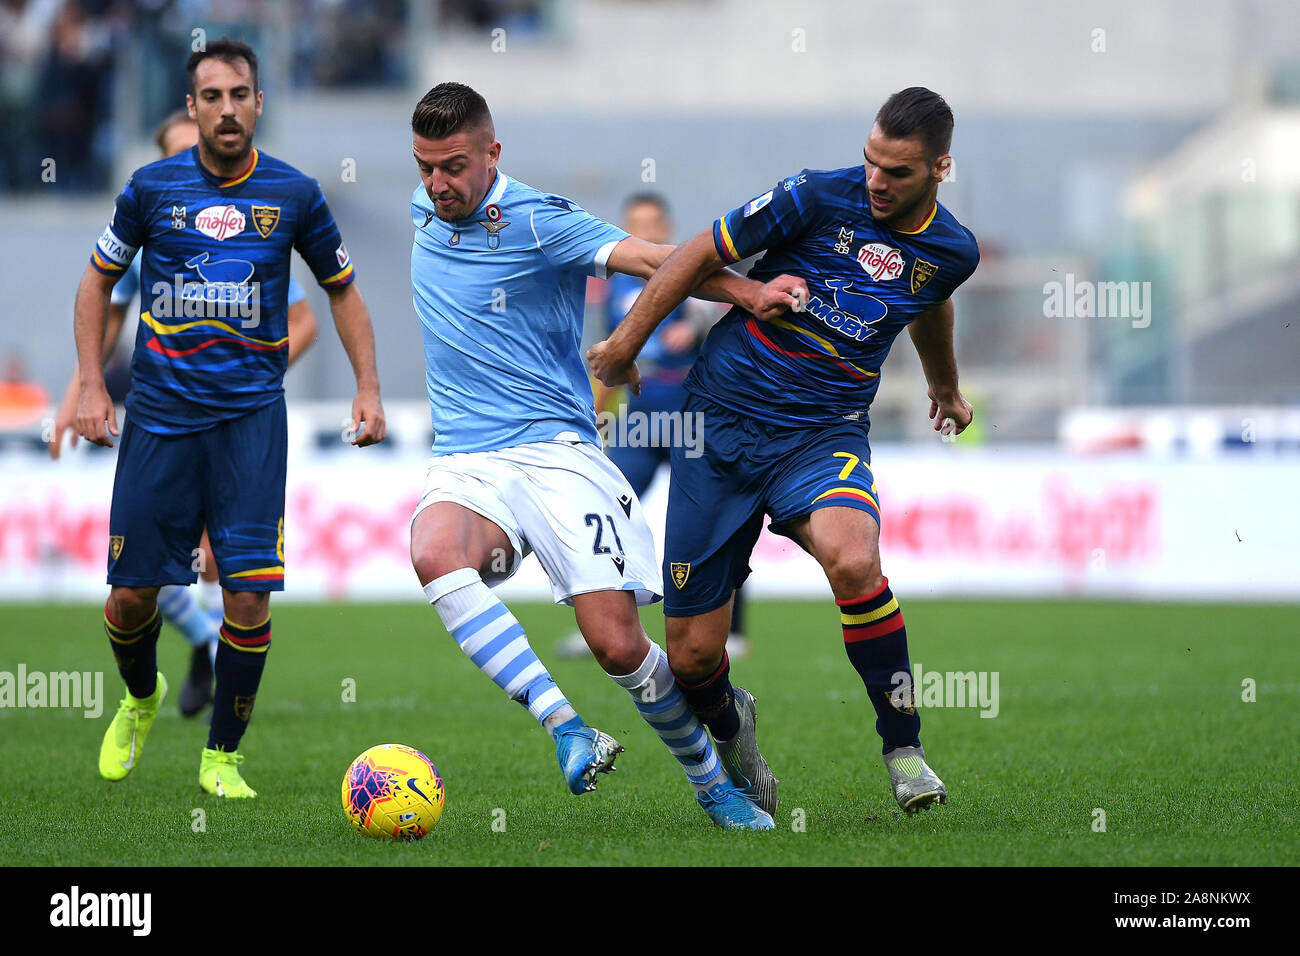 Rome, Italy. 10th Nov, 2019. Sergej Milinkovic-Savic of SS Lazio is challenged by Panagiotis Tachtsidis of US Lecce during the Serie A match between Lazio and Lecce at Stadio Olimpico, Rome, Italy on 10 November 2019. Photo by Giuseppe Maffia. Credit: UK Sports Pics Ltd/Alamy Live News Stock Photo